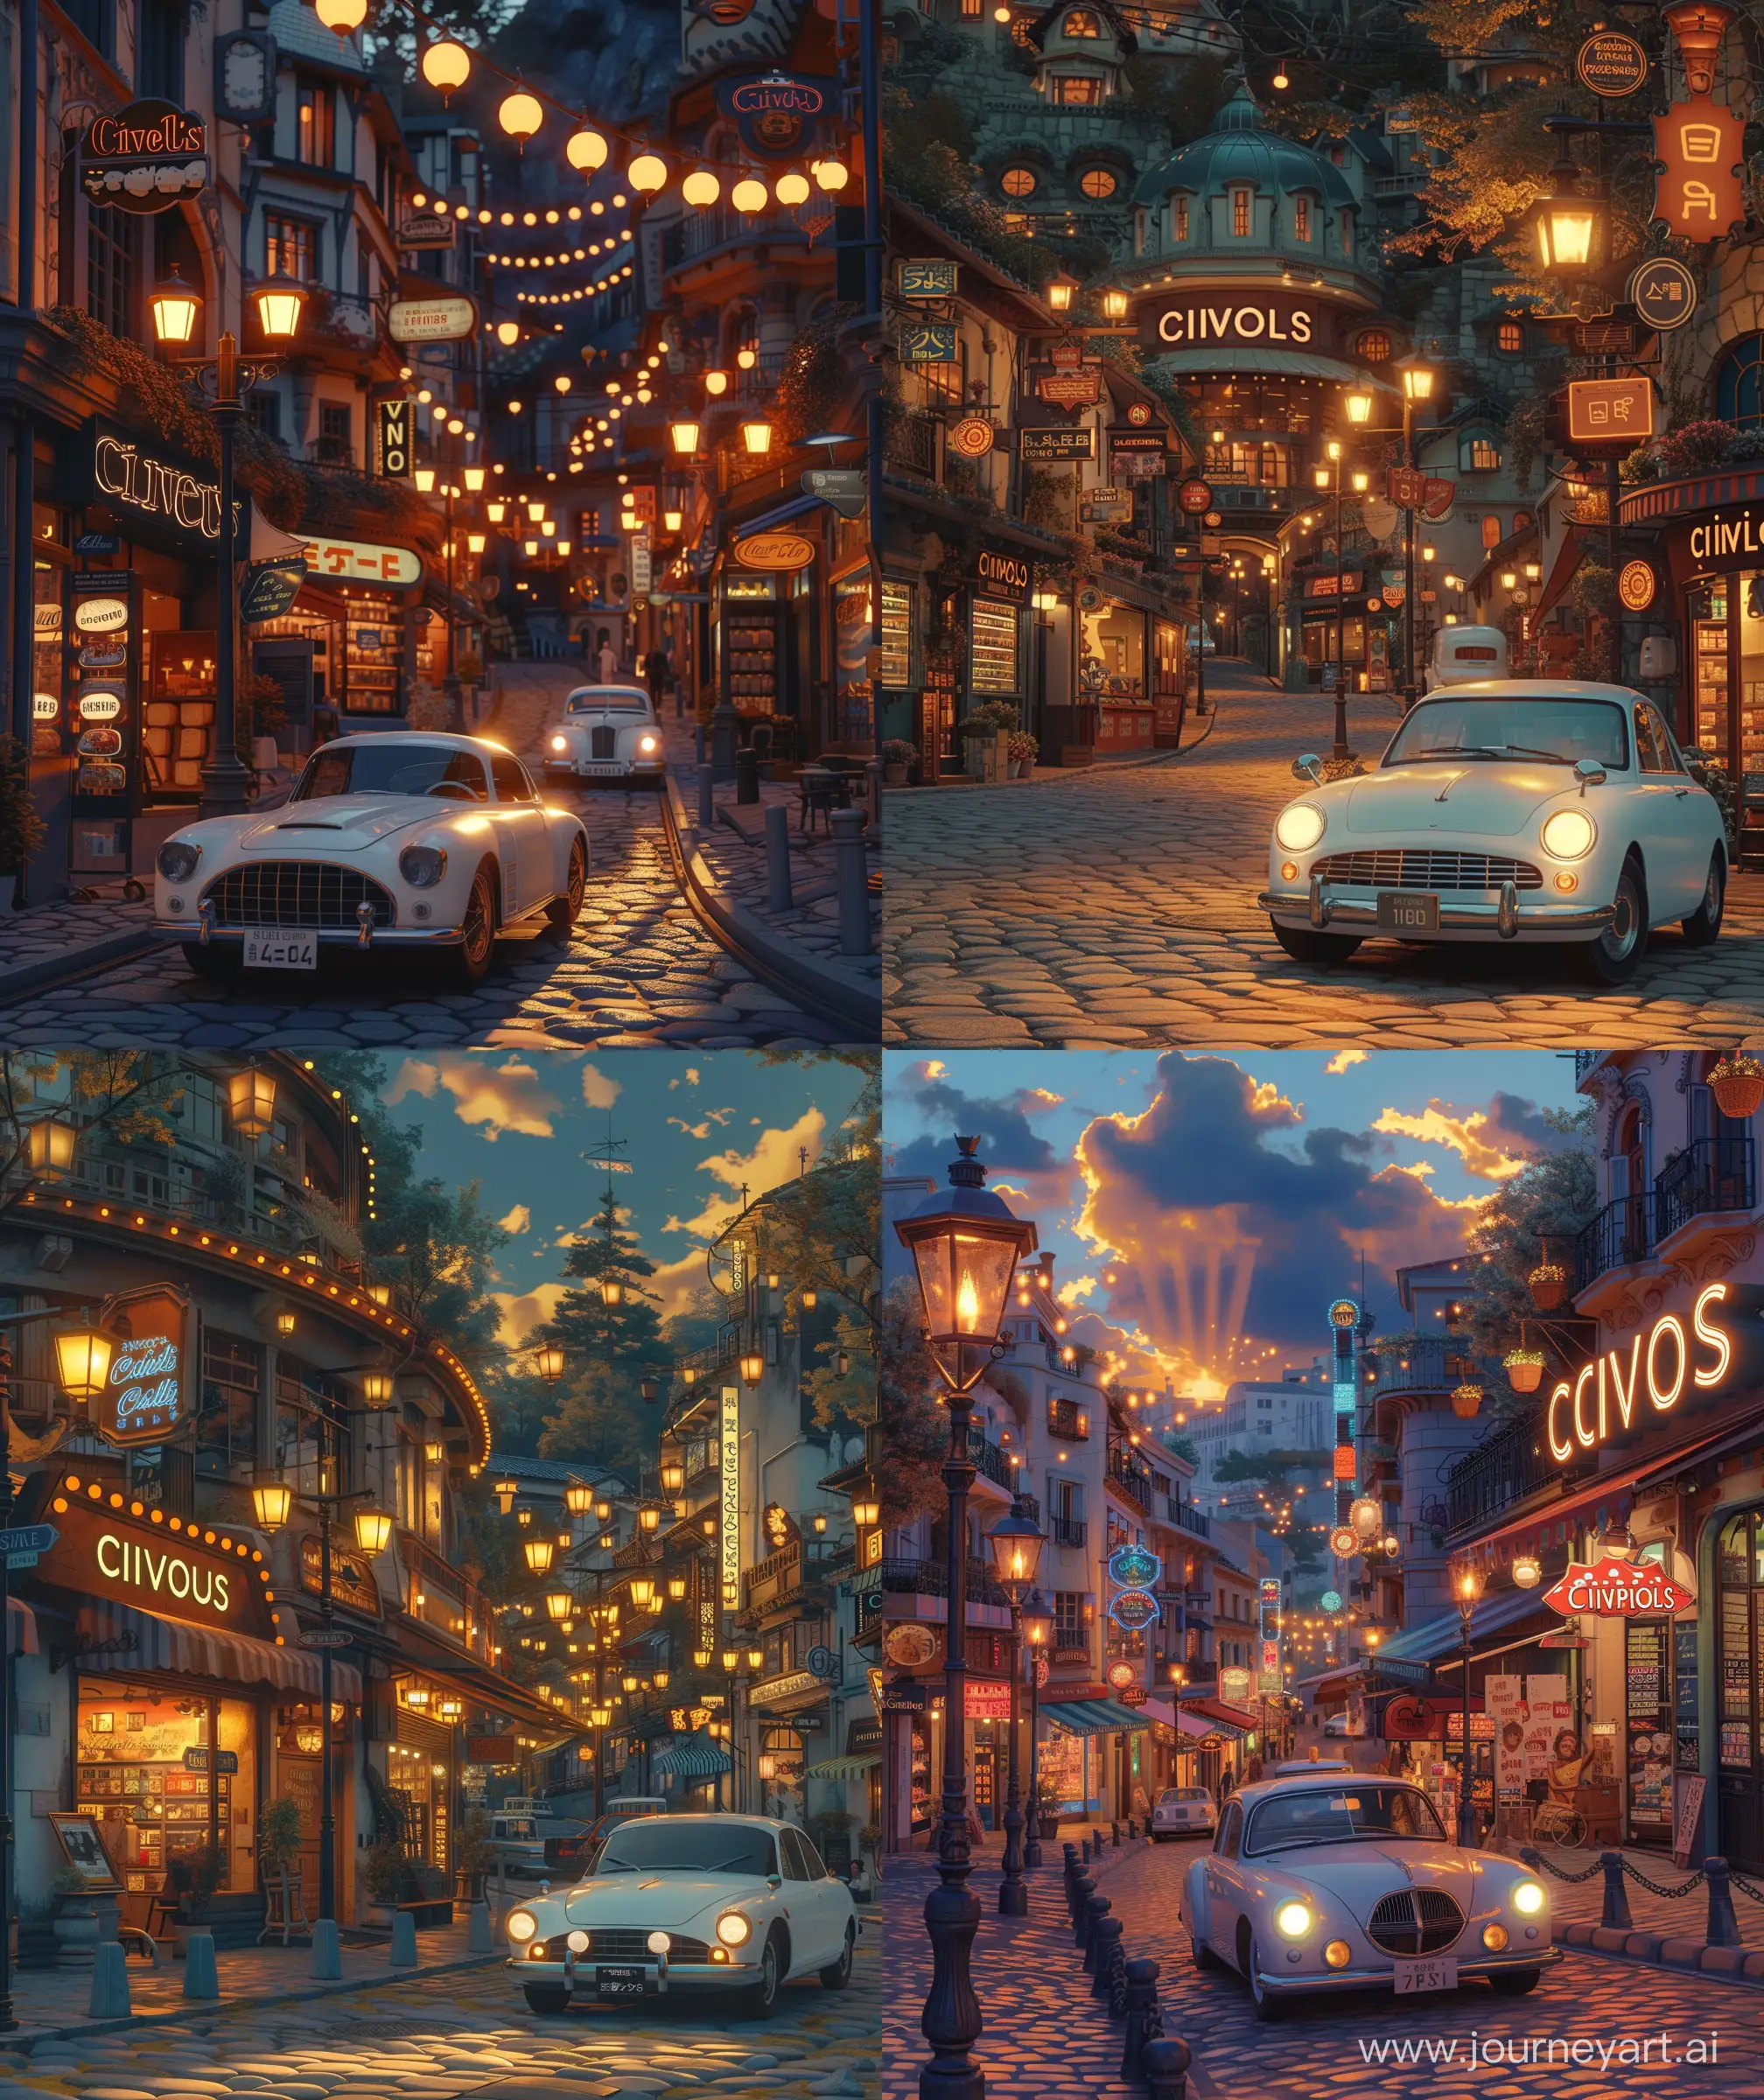 Beautiful anime scenary, Ghibli style, illustration ,retro style street, evening time, sunlight over building, many beautiful shop, white retro car, many lamp post, cinema theatre, "Cinepolis" writing sign, verious glowing sign, decorating, stone pavement road, Ghibli, anime scenary,  no hyperrealistic --ar 27:32 --s 400